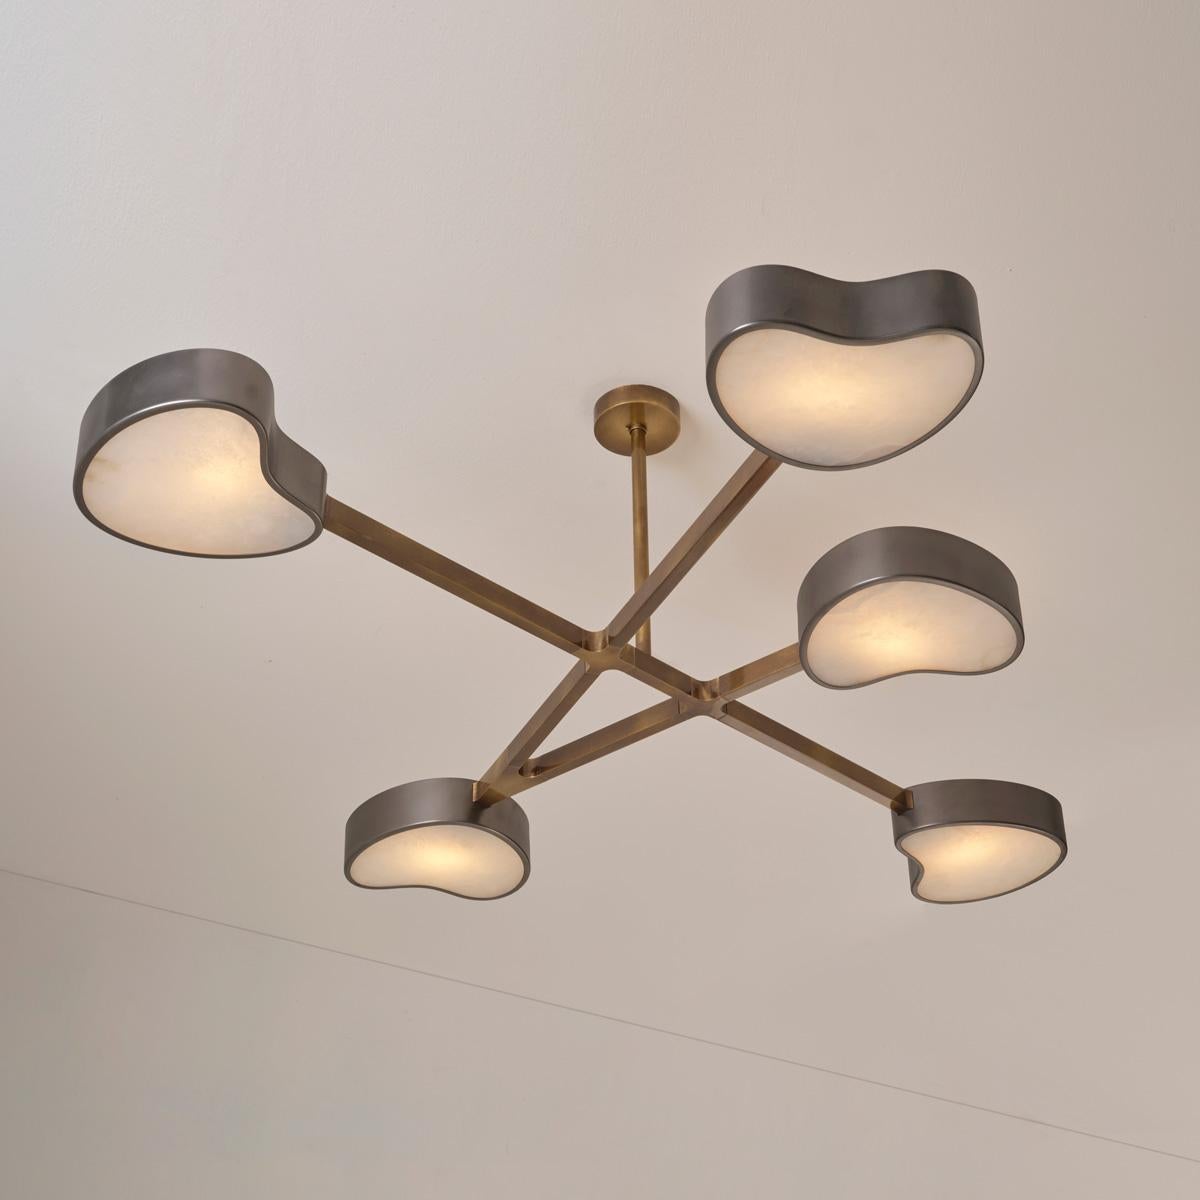 Contemporary Cuore N.5 Ceiling Light by Gaspare Asaro. Polished Brass Finish For Sale